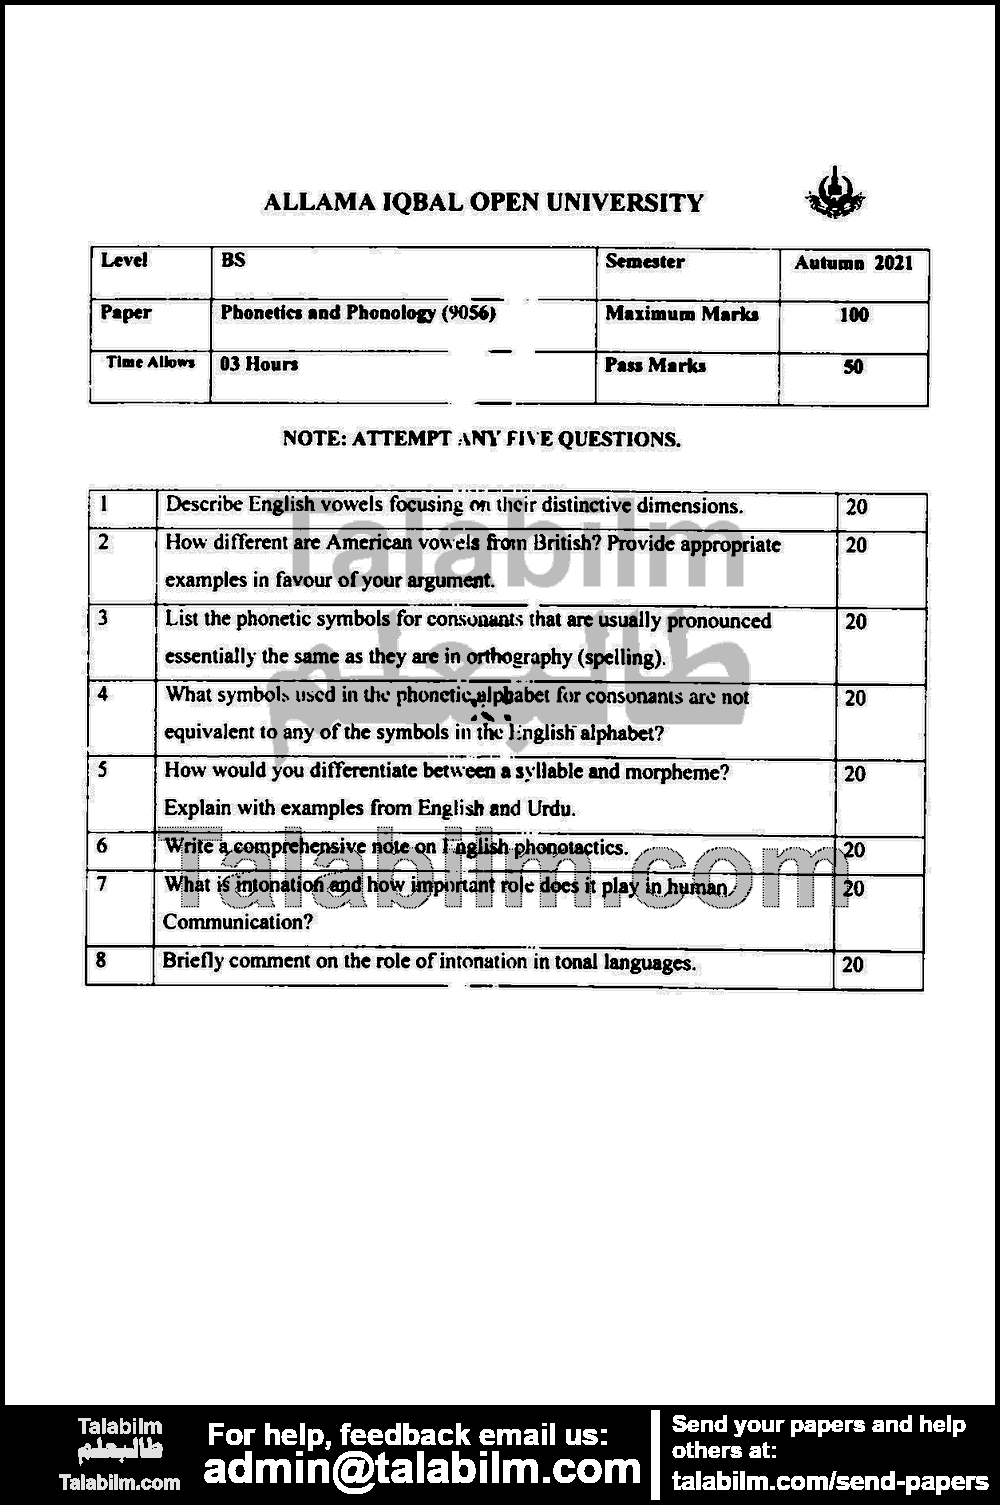 aiou solved assignment 9056